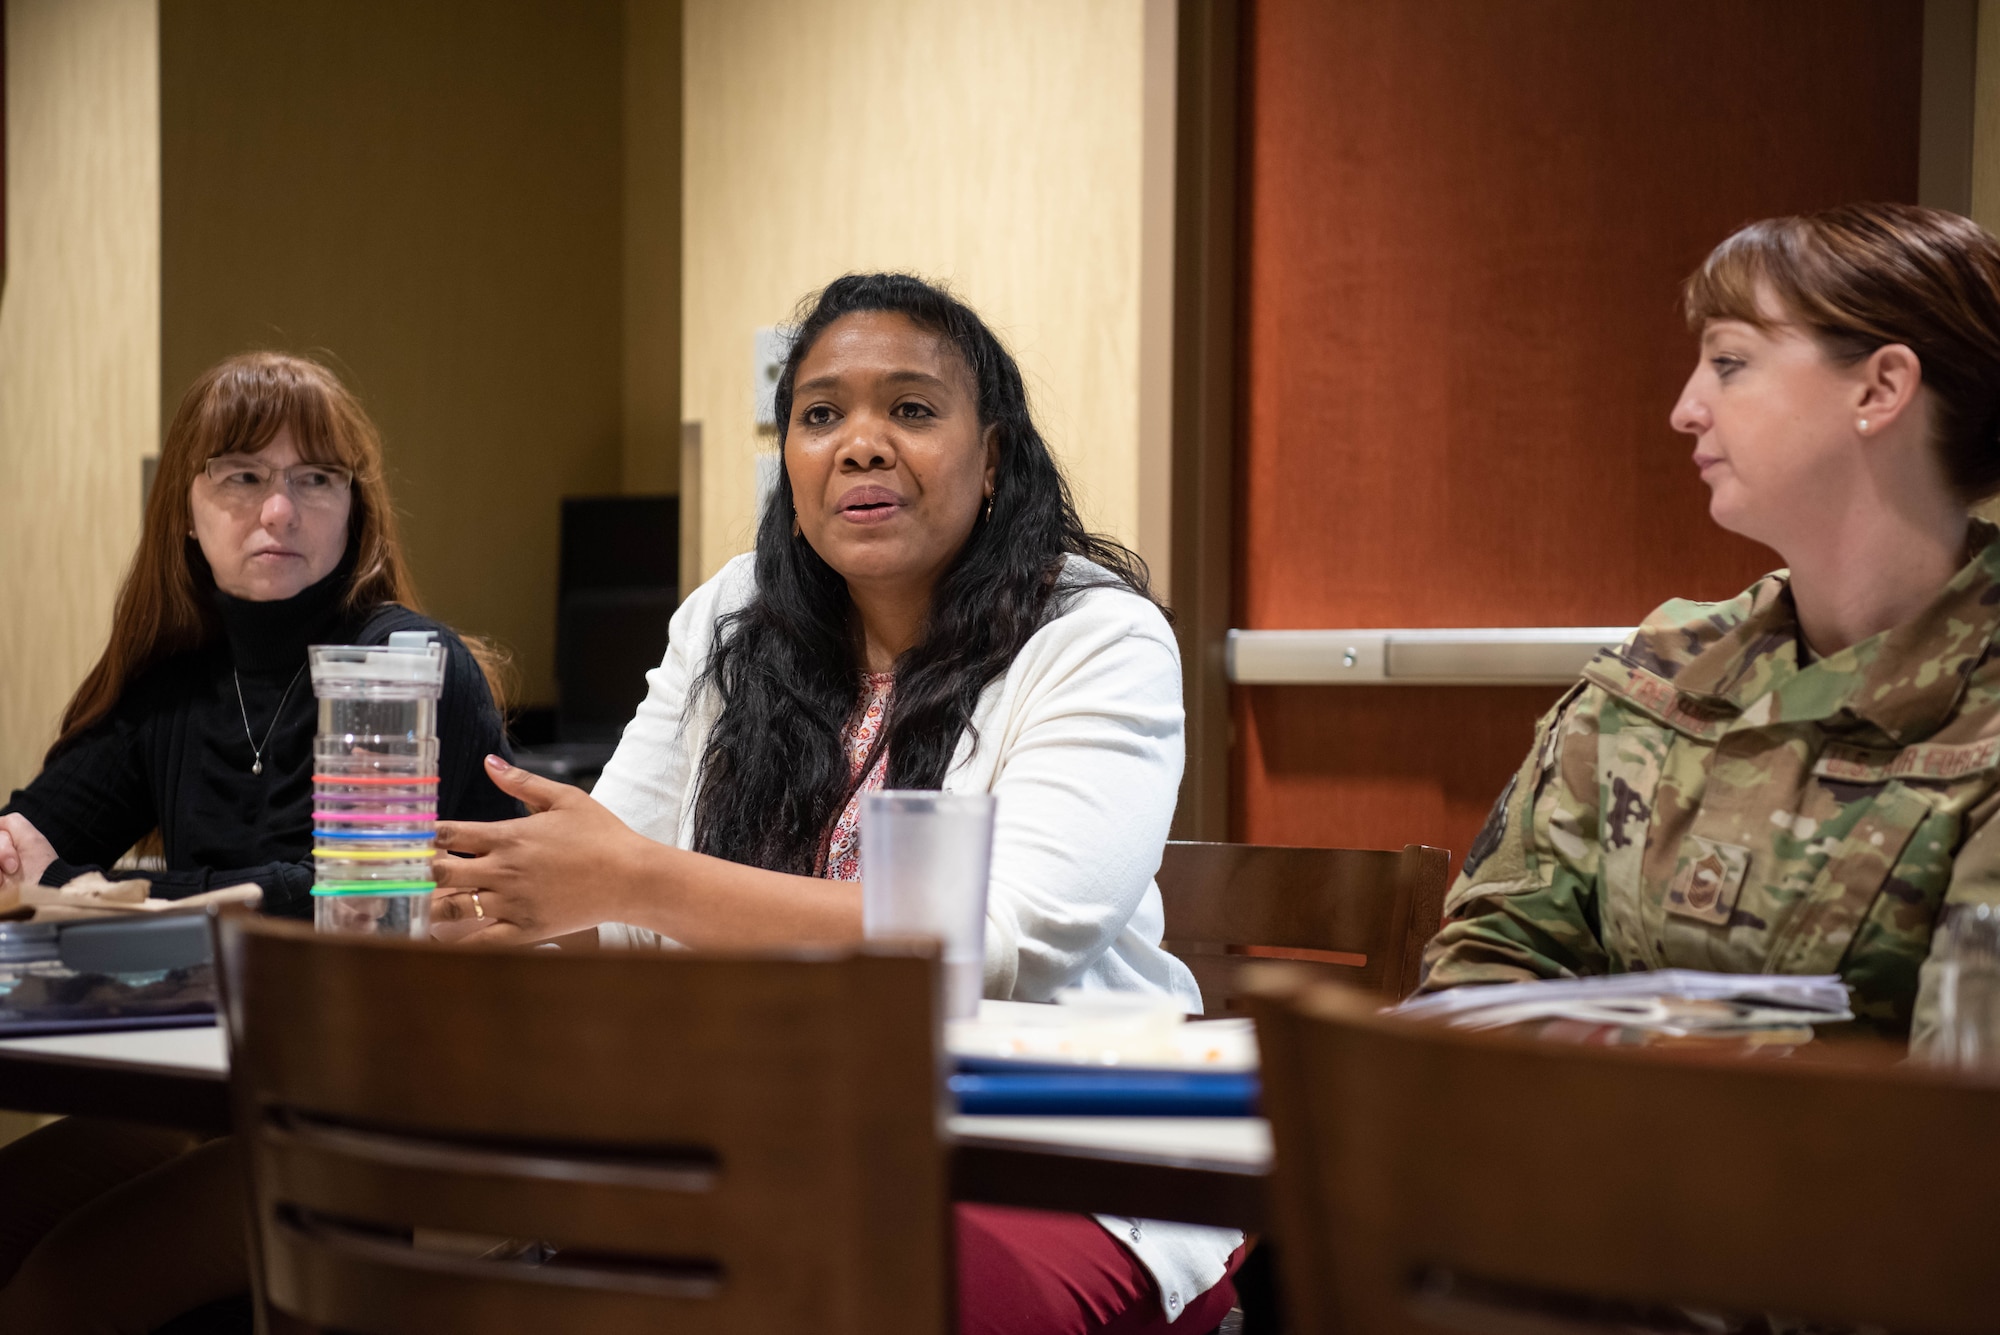 Base members speak at the 28th Bomb Wing Women’s Lean In Circle in the Raider Café conference room on Ellsworth Air Force Base, S.D., March 26, 2019. Both men and women serving on Ellsworth AFB were invited to attend to discuss and break down barriers to success and happiness that are based on gender. (U.S. Air Force photo by Tech. Sgt. Jette Carr)